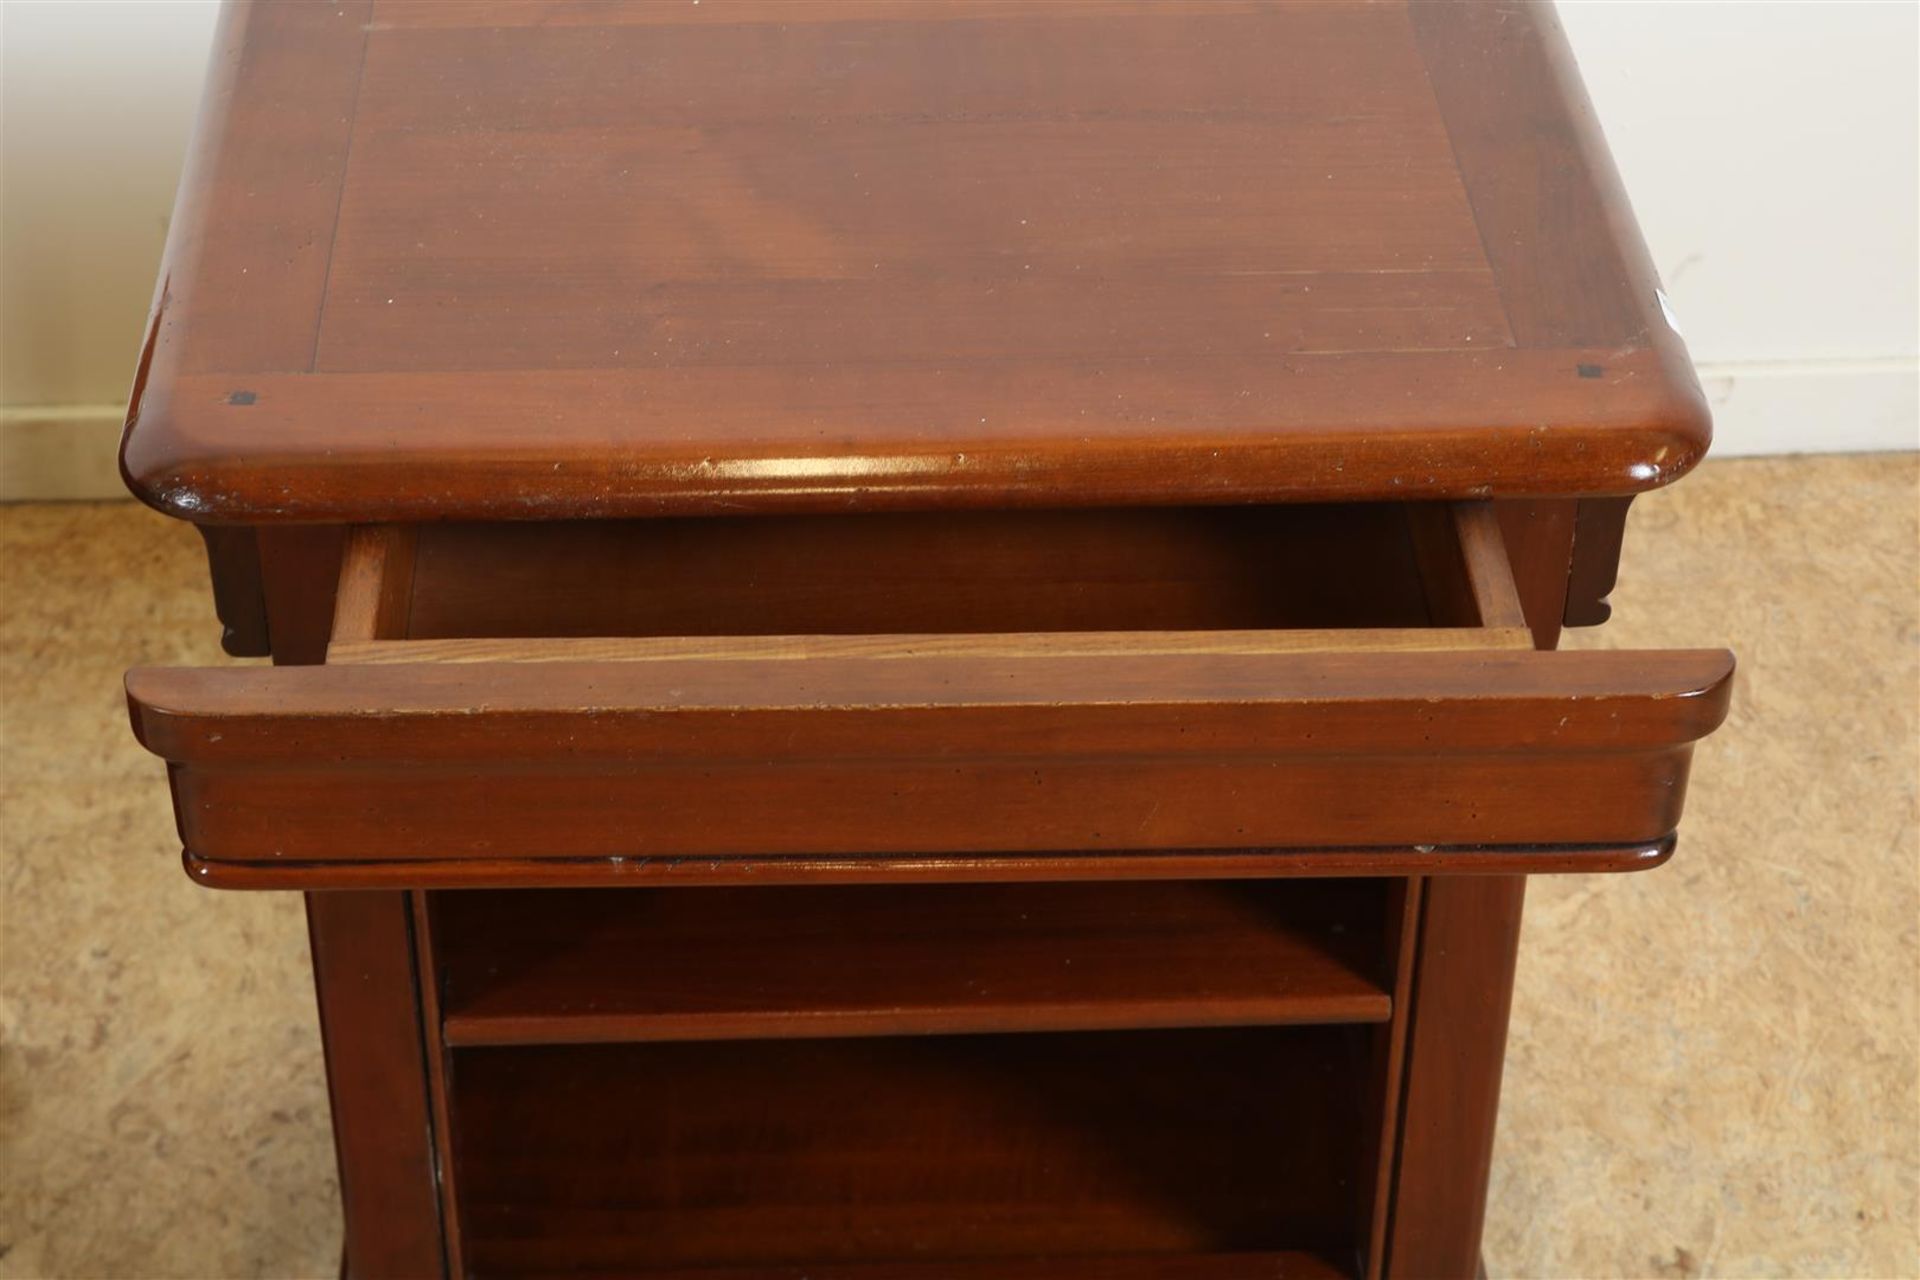 Set of cherry wood veneered bedside tables with drawer, h. 55, w. 53, d. 37 cm. - Image 3 of 3